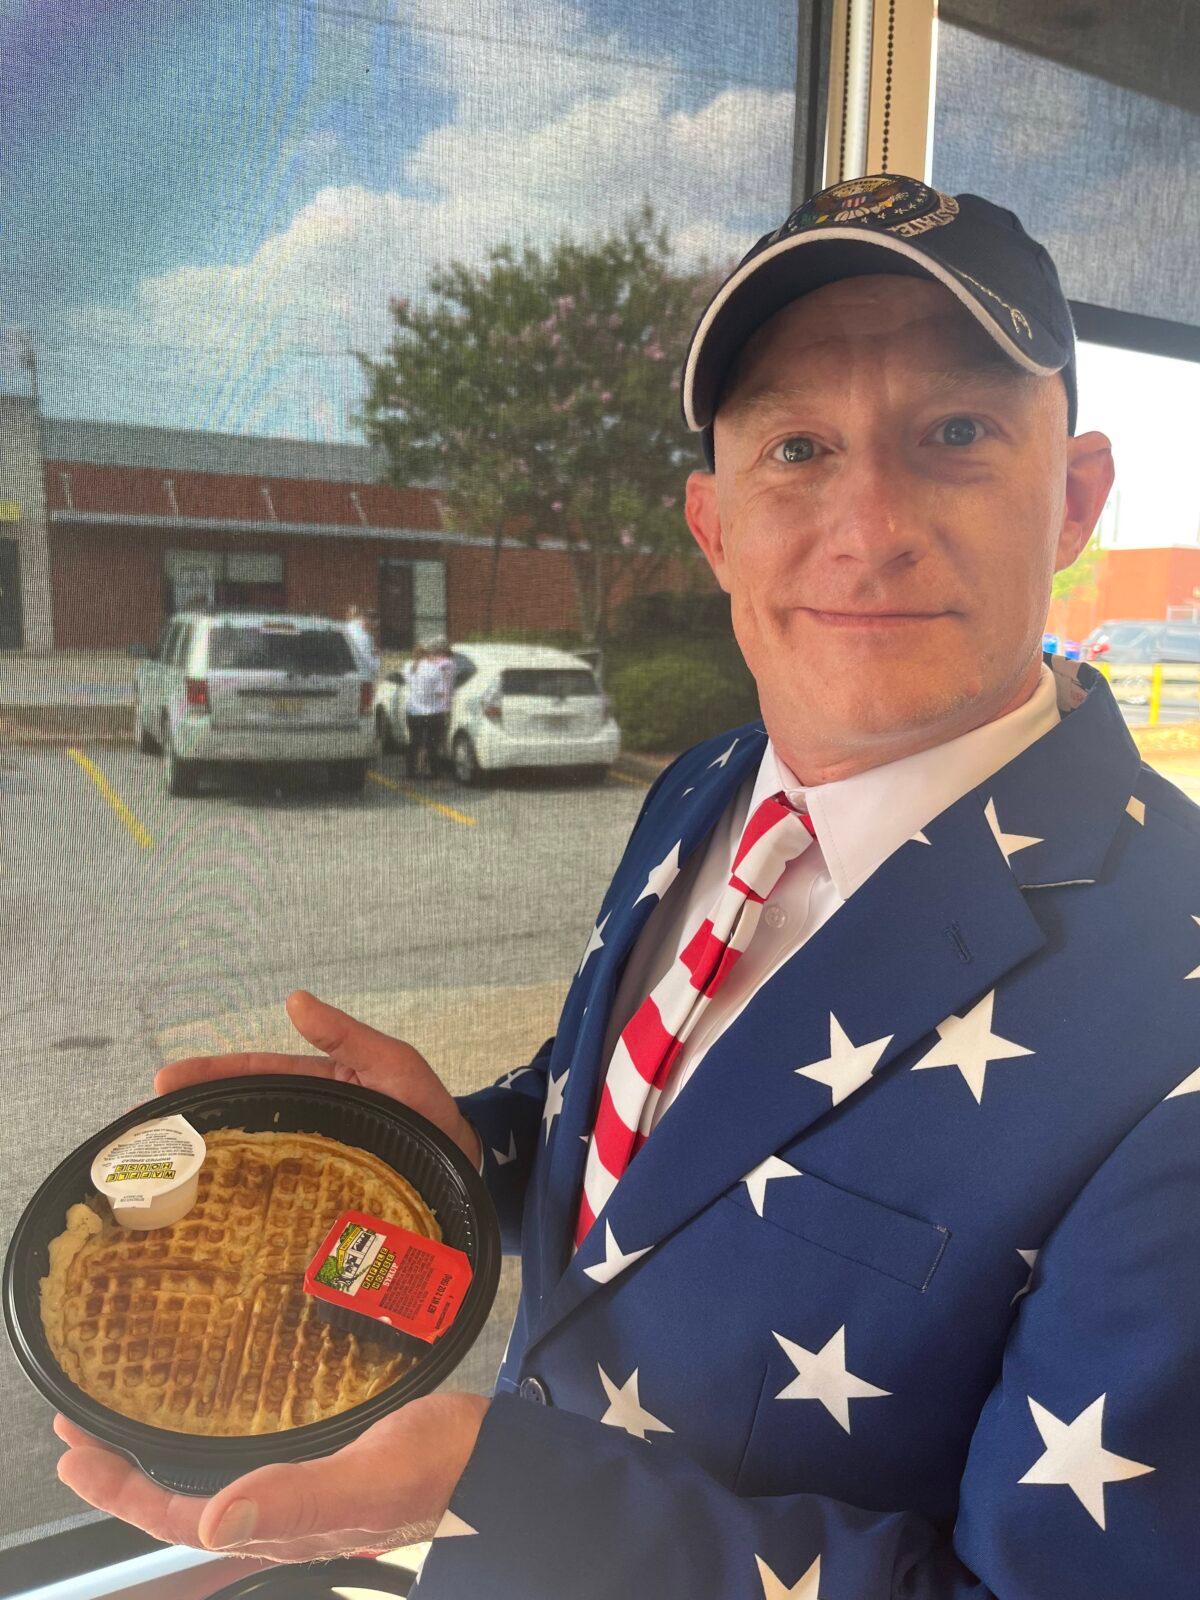 Cliff Rhodes, 45, was among the guests invited to be treated to a waffle, courtesy of former President Donald Trump, at a Waffle House in Columbus, Ga., on June 10, 2023. (Courtesy of Cliff Rhodes)